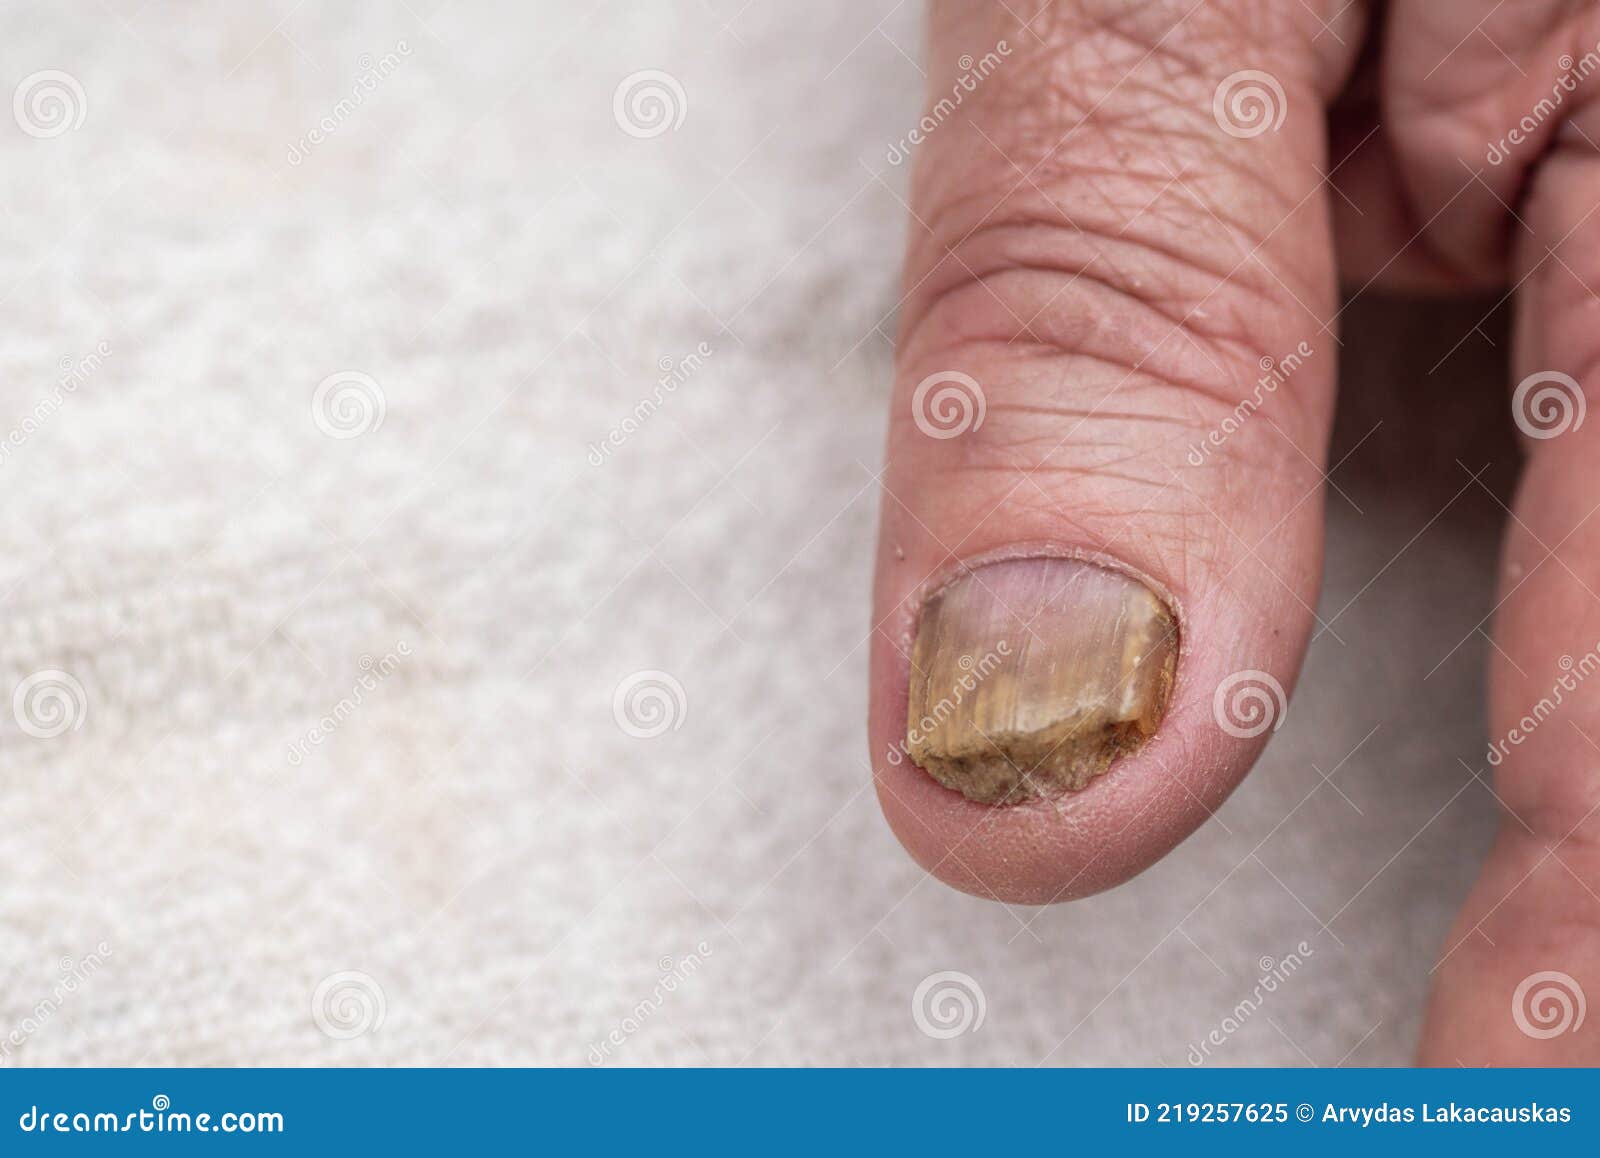 Big Close Fungus Infection Nails Hand Finger Onychomycosis Fungal Infection  Stock Photo by ©n.nonthamand.gmail.com 193497866